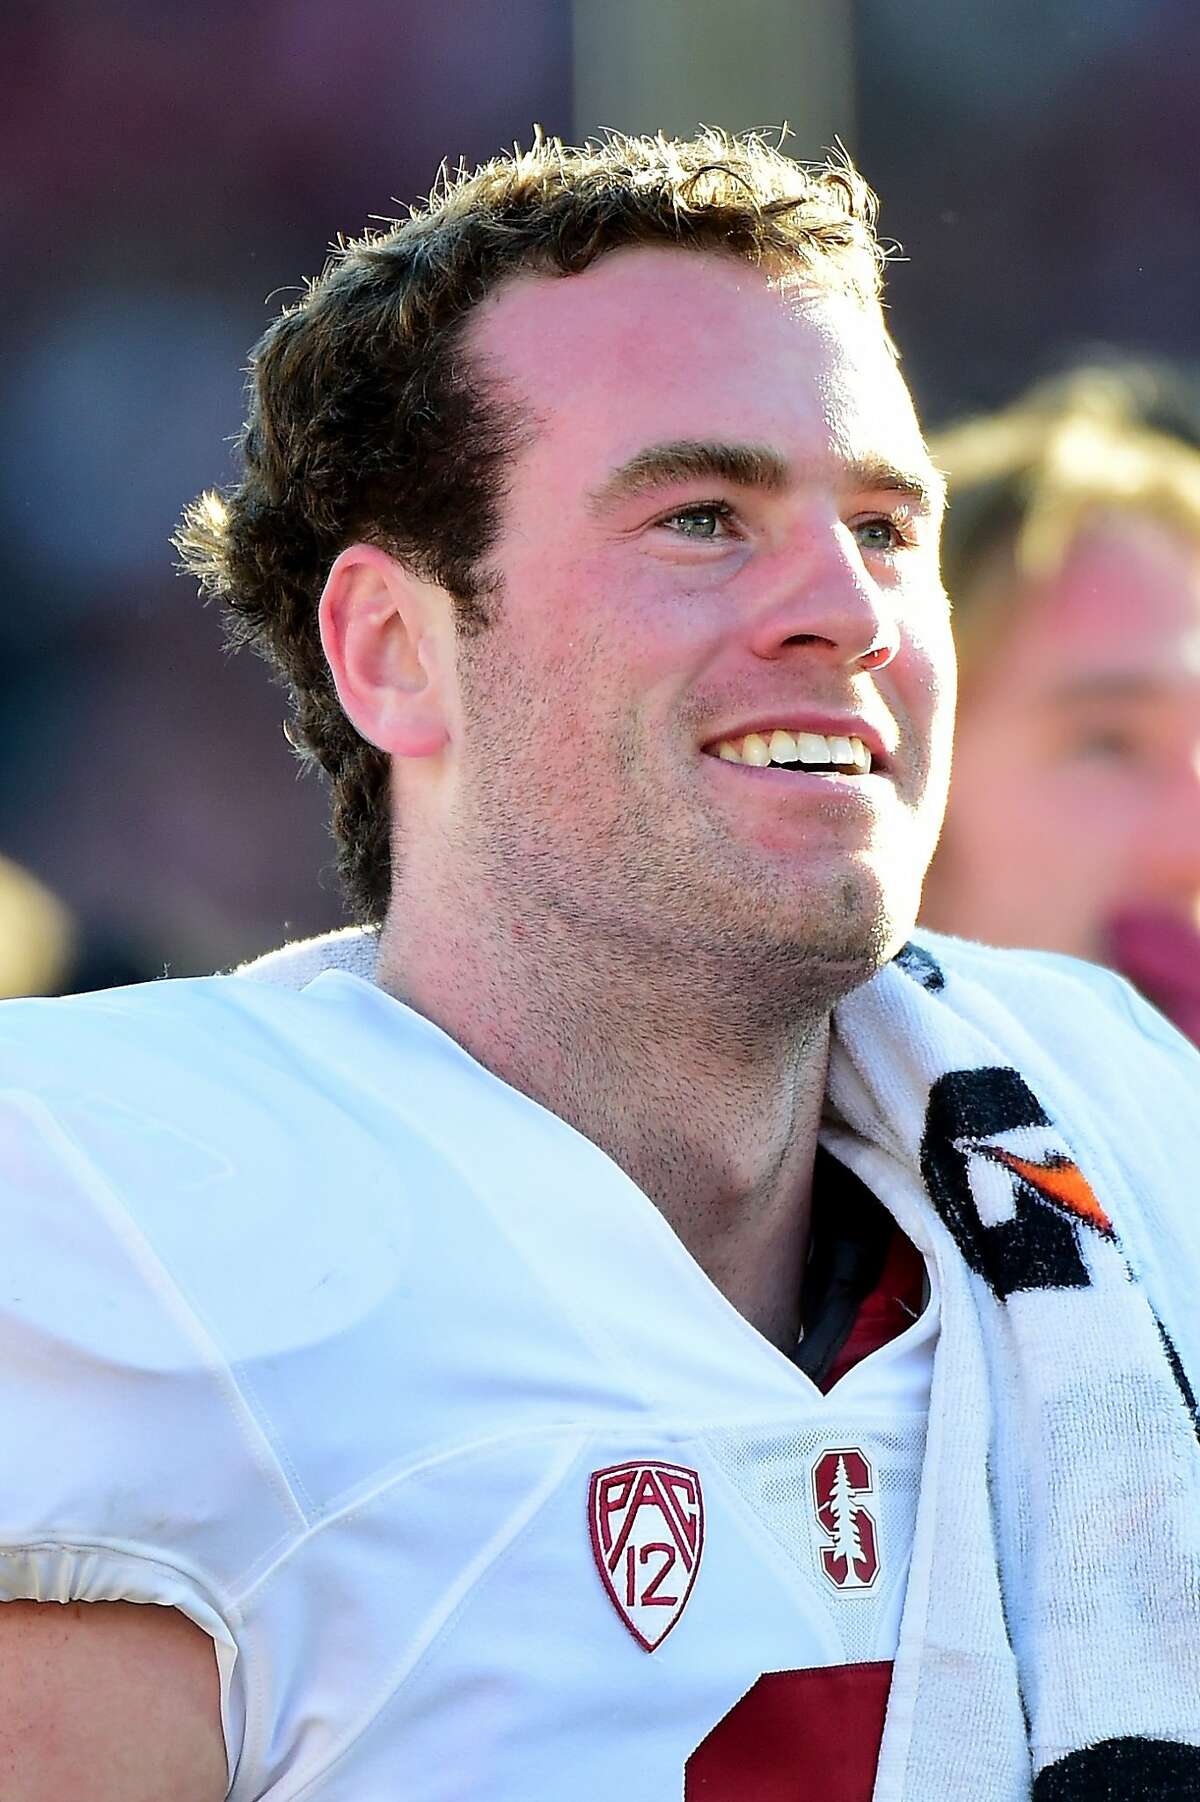 Kevin Hogan was all smiles after the Rose Bowl.